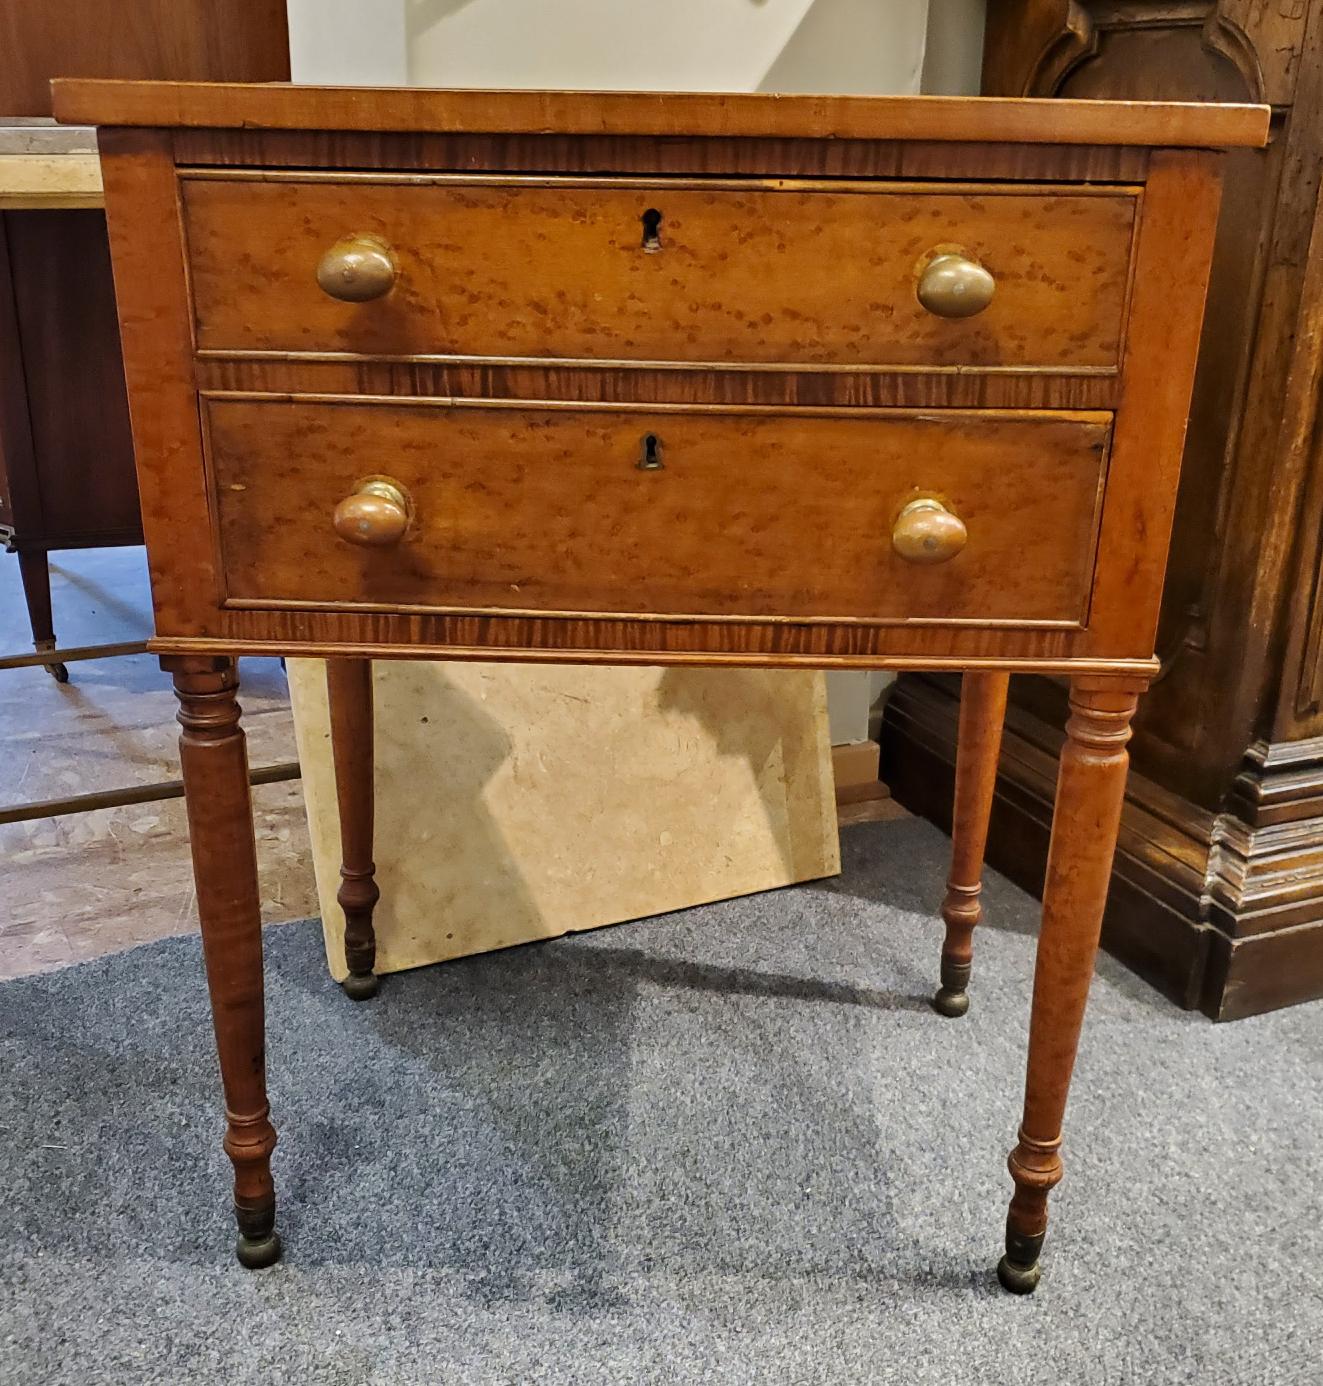 Early 19th century New England side table. Made of beautiful Birdseye Maple with two drawers and delicate turned legs. Great color and patination and good proportions. United States, circa 1840.
Measures: 28” H 22” W 16” D.